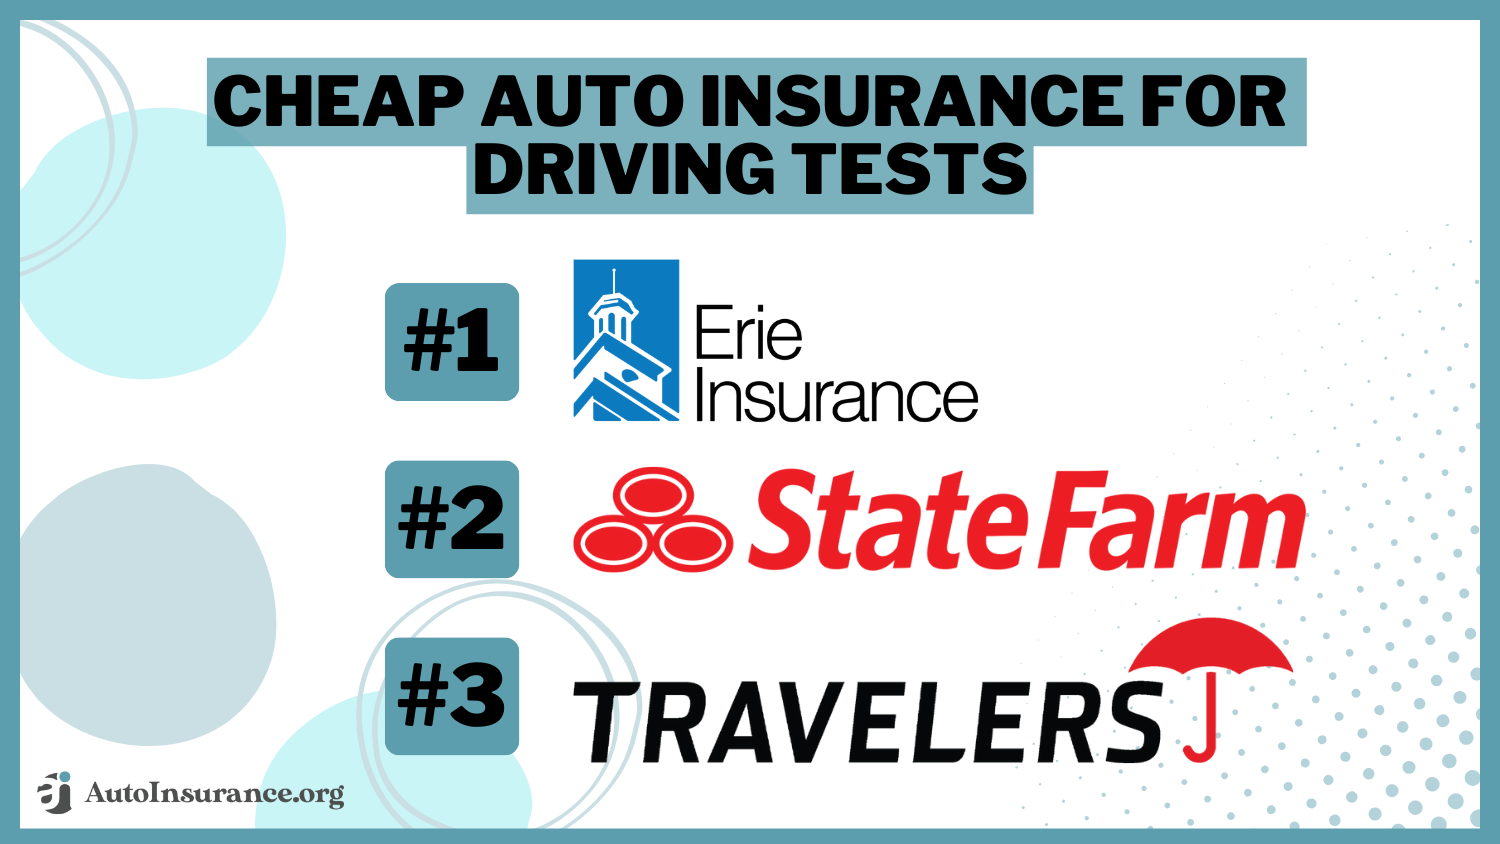 erie, state farm, travelers cheap auto insurance for driving tests